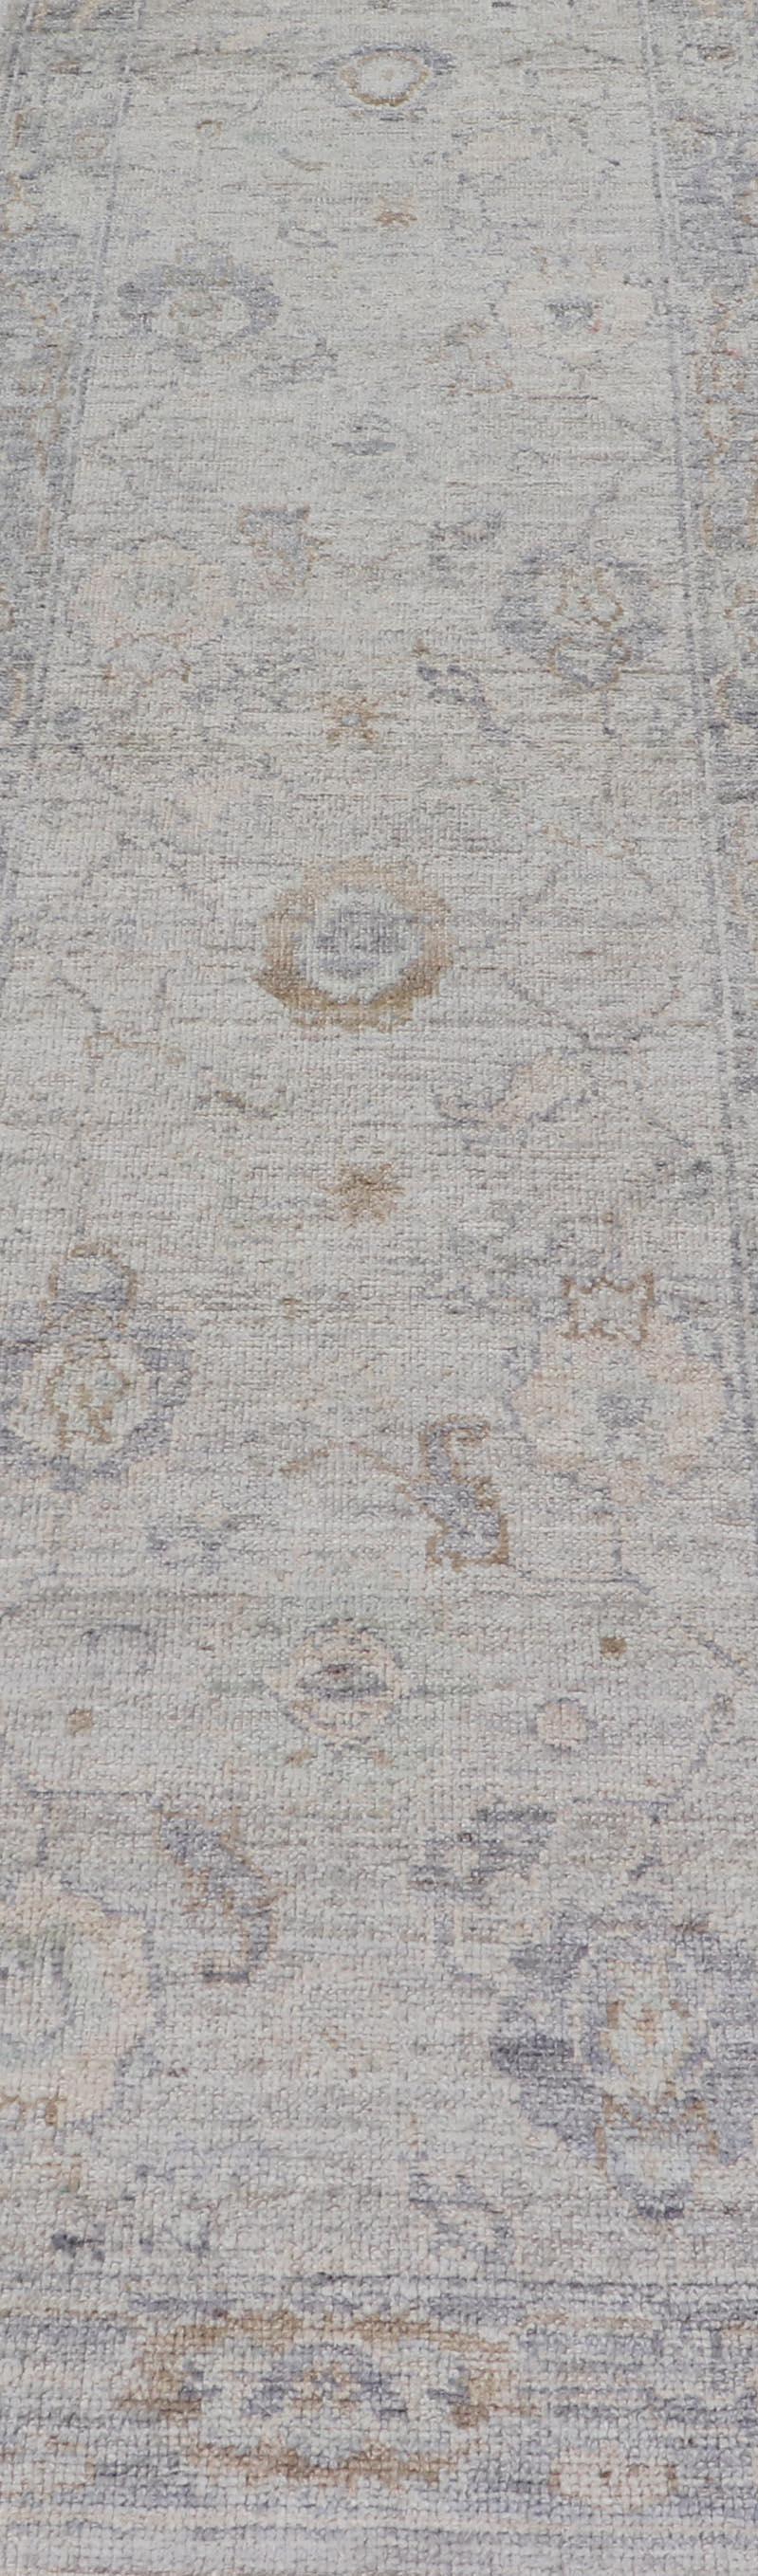 Contemporary Angora Oushak Turkish Rug in Cream, Silver, Gray, and Shades of Light Grey